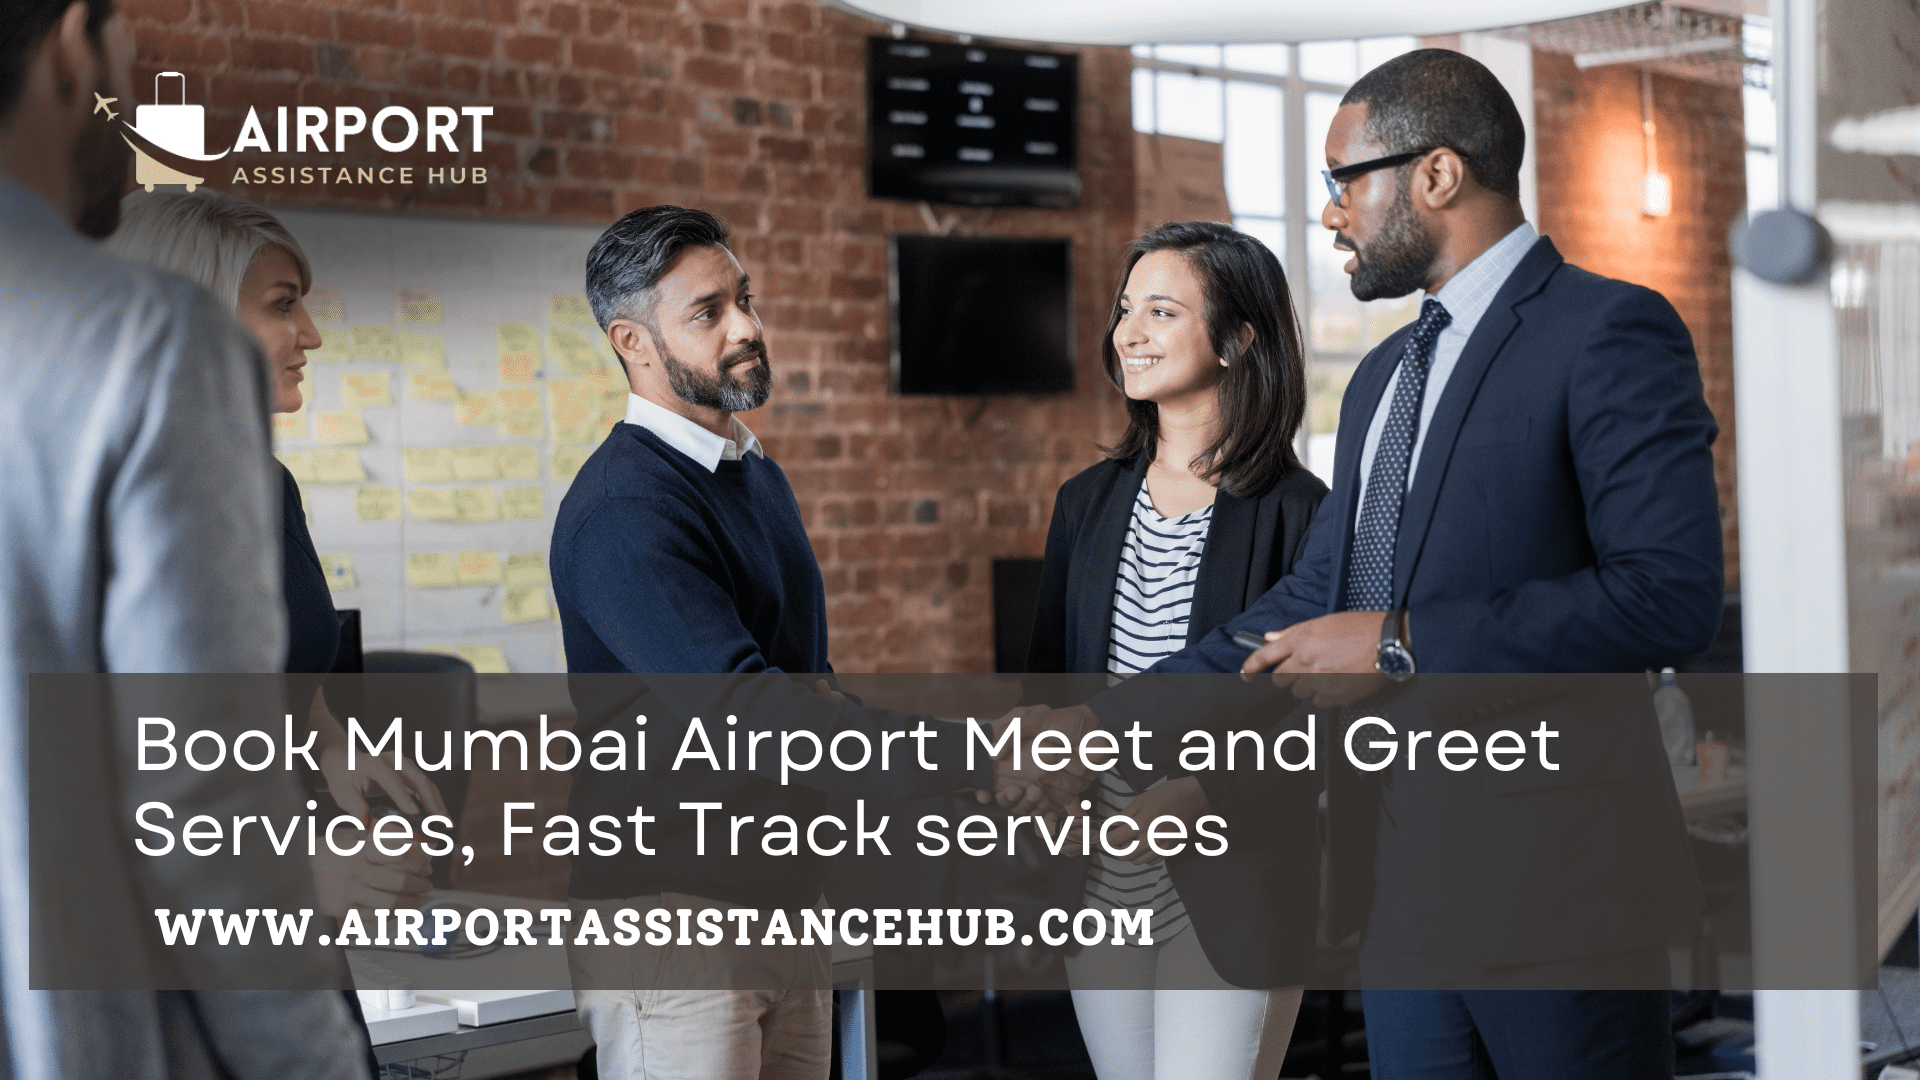 Book Mumbai Airport Meet and Greet Services, Fast Track services